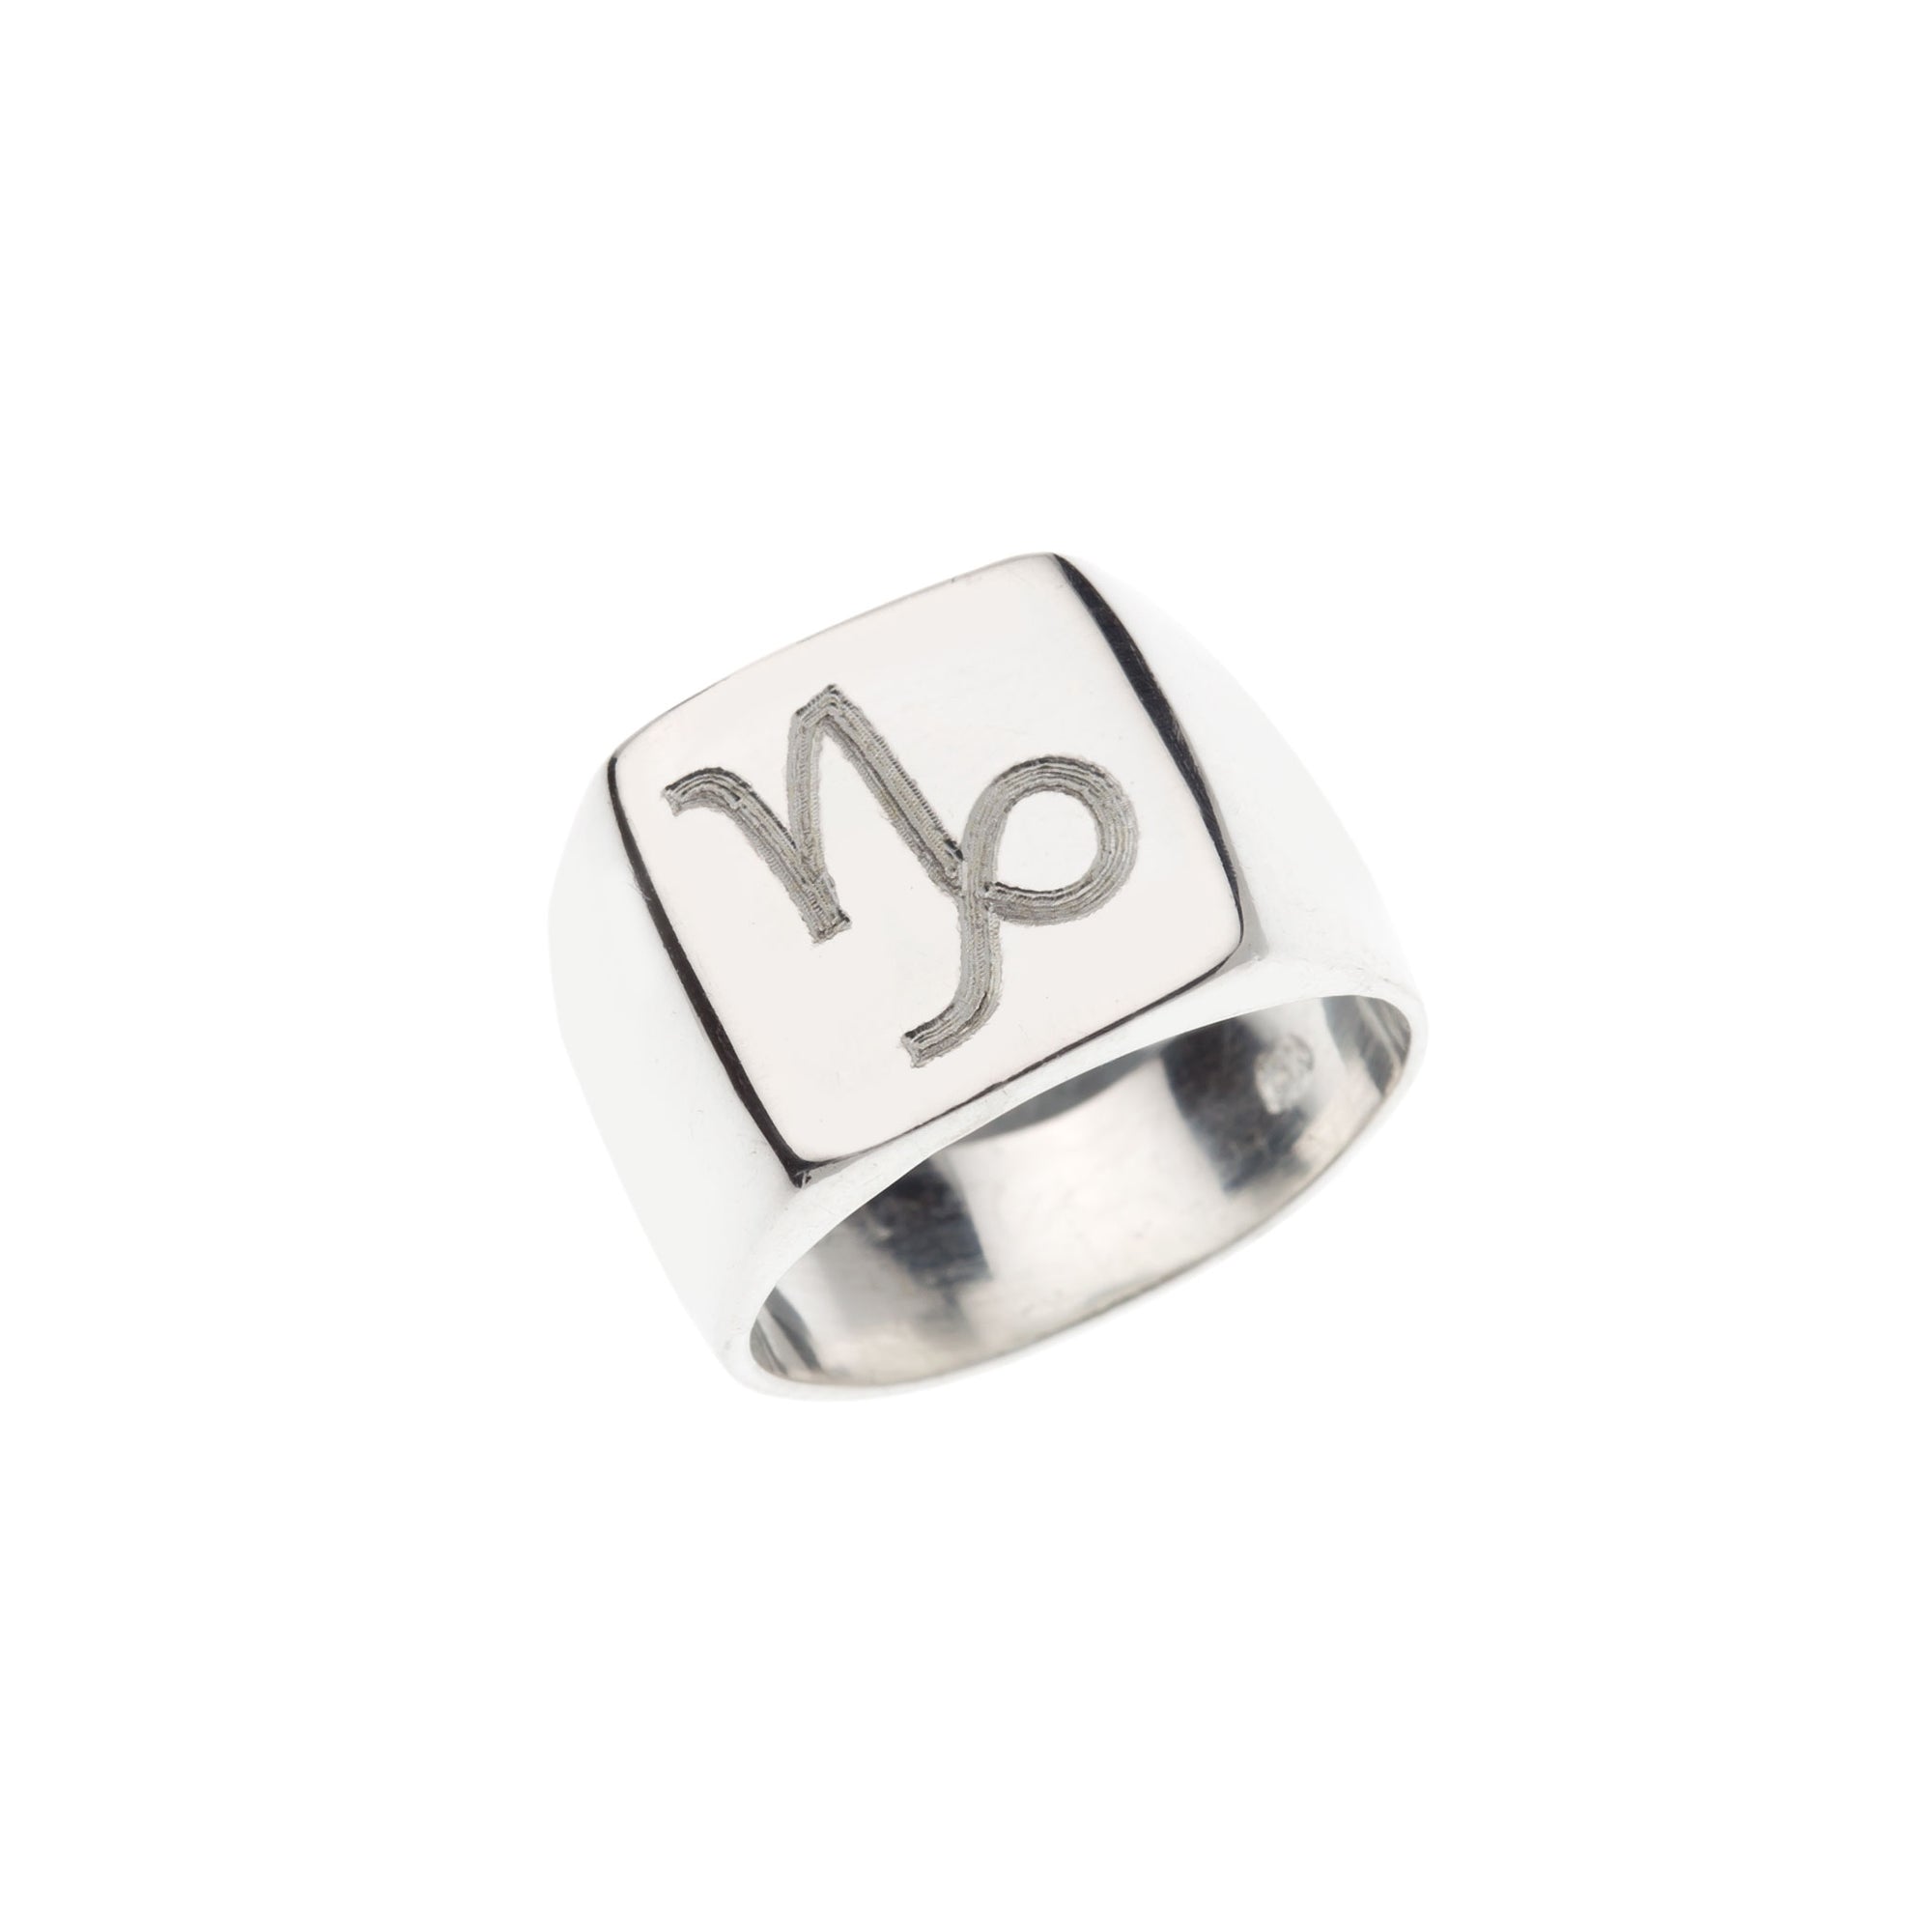 Square silver signet ring with engraved Capricorn symbol.